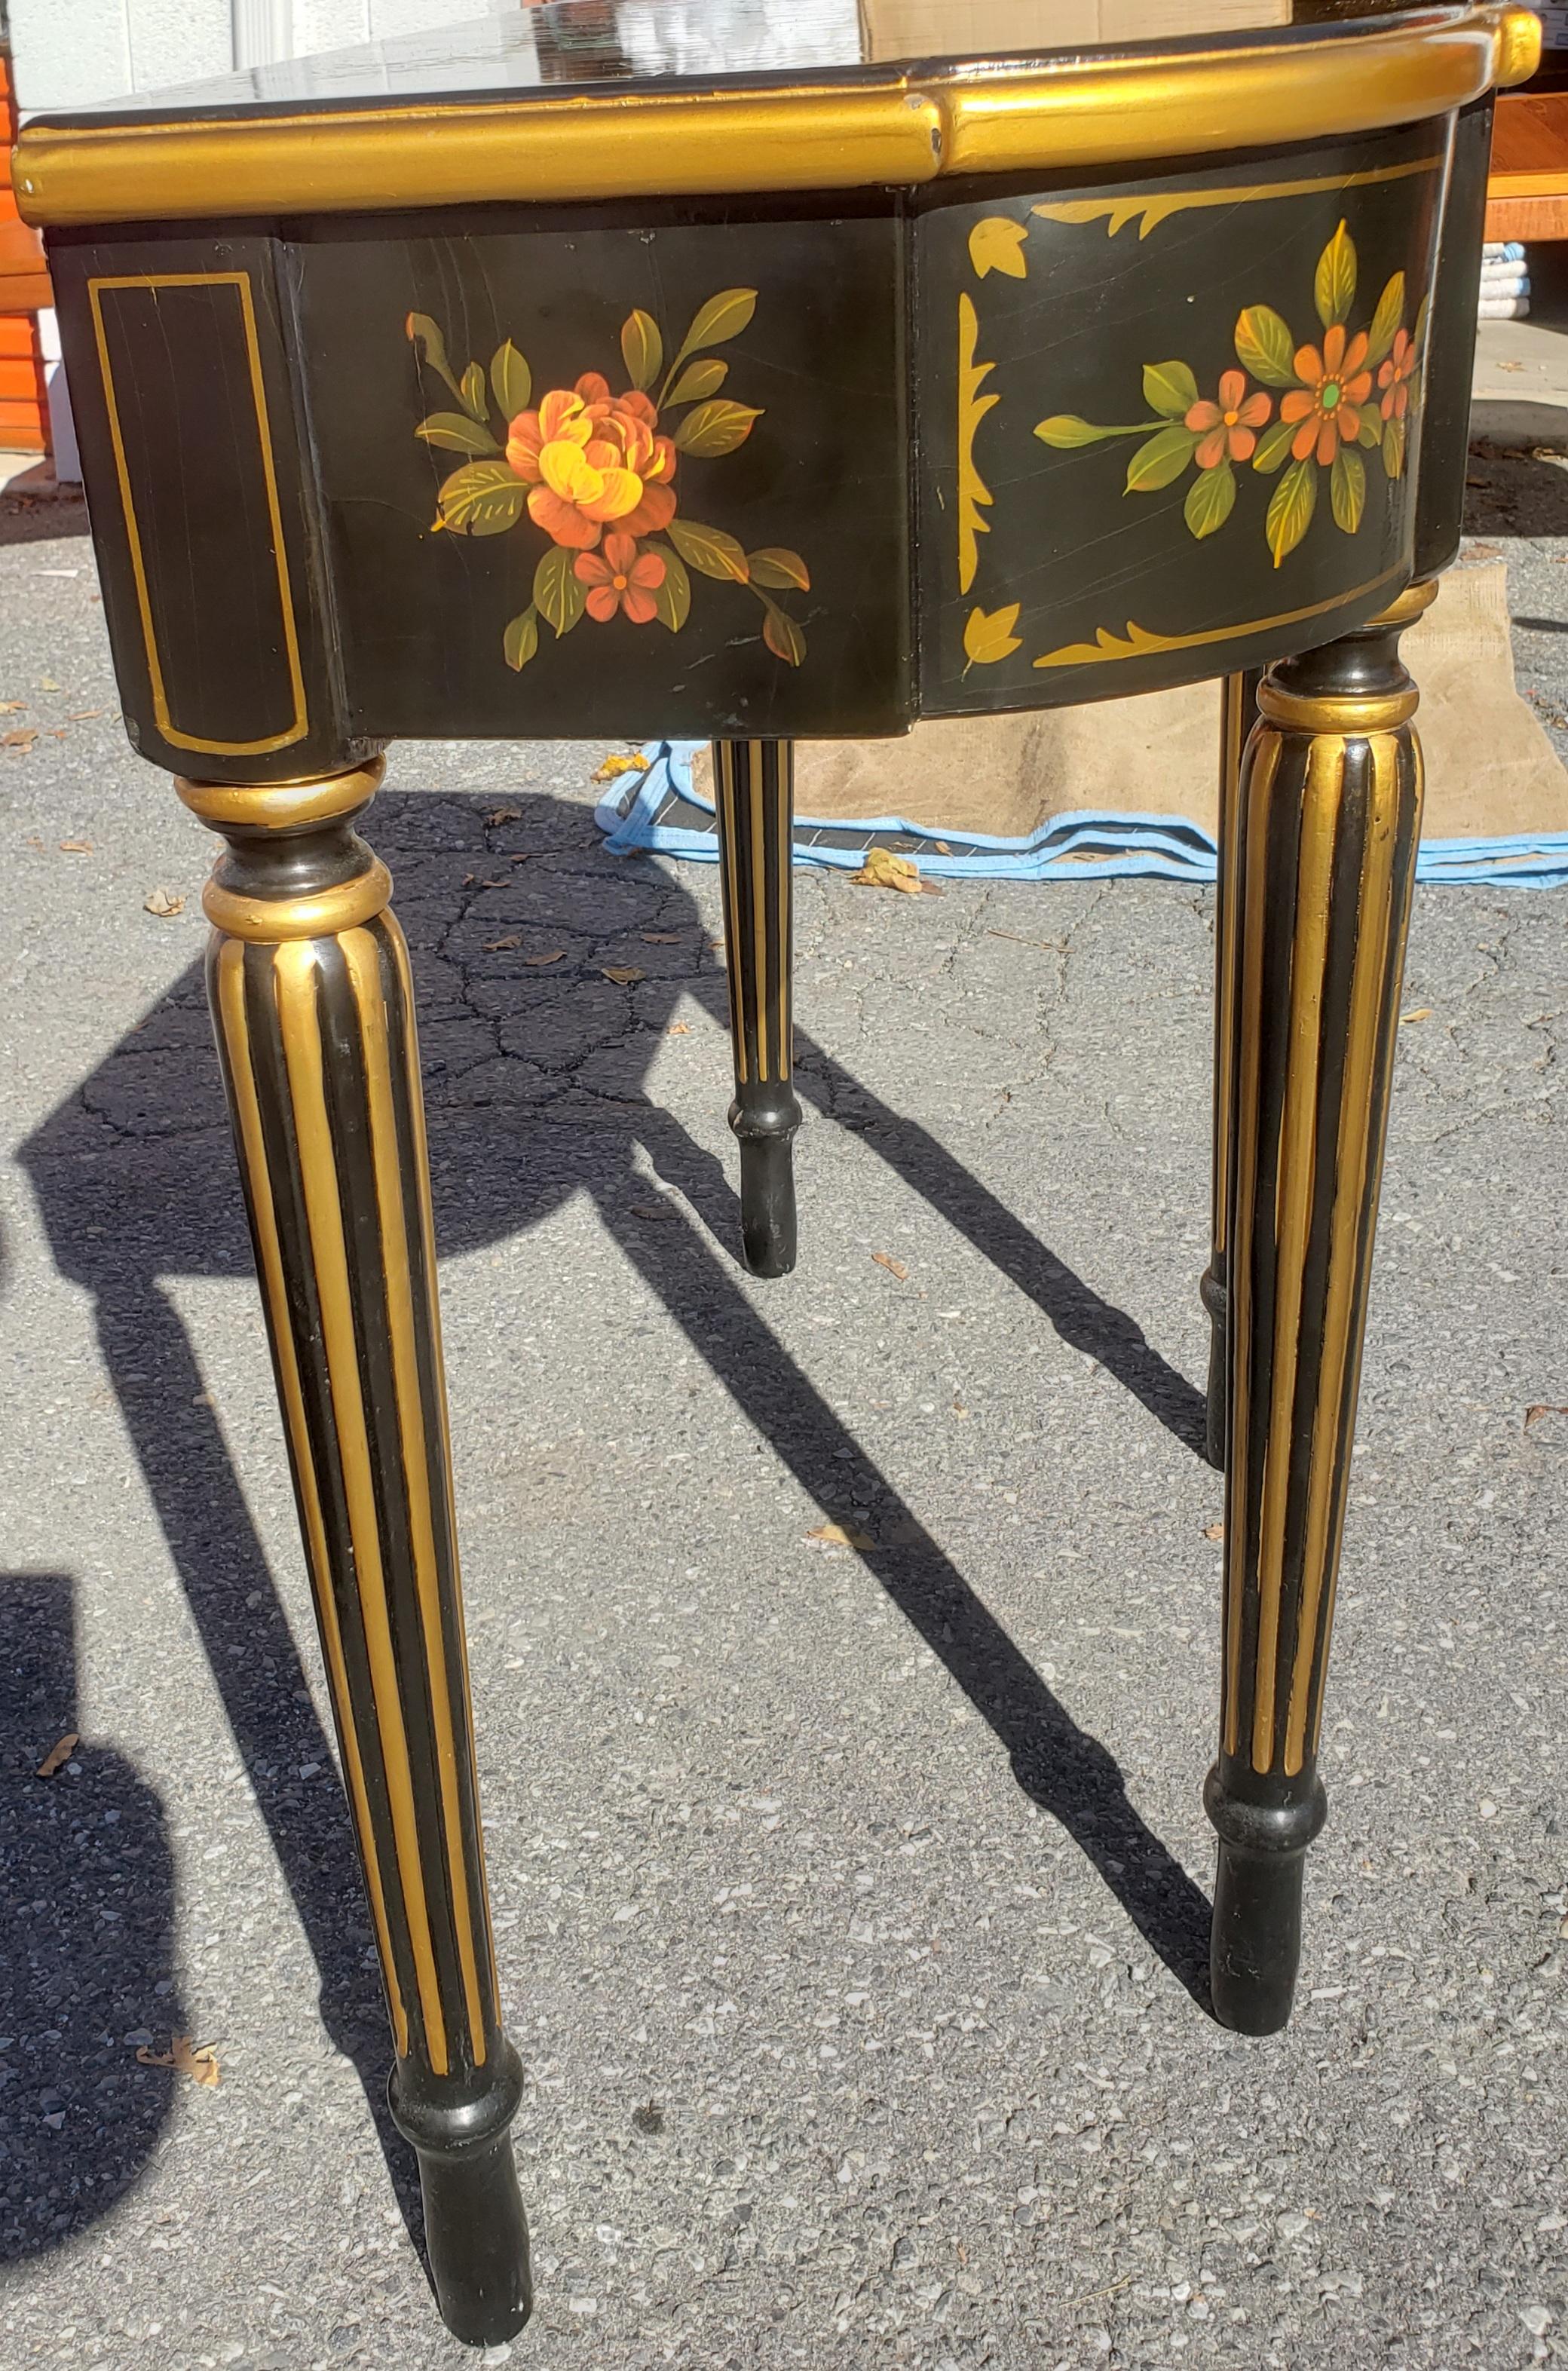 1980s Oriental Accent Hitchcock Style console table and mirror. Crackle lacquer Paint on console top. Hand painted flowers on top and sides. Banded golden paint and column legs.
Very beautiful. We have a matching authentic Lambert Hitchcock Chair